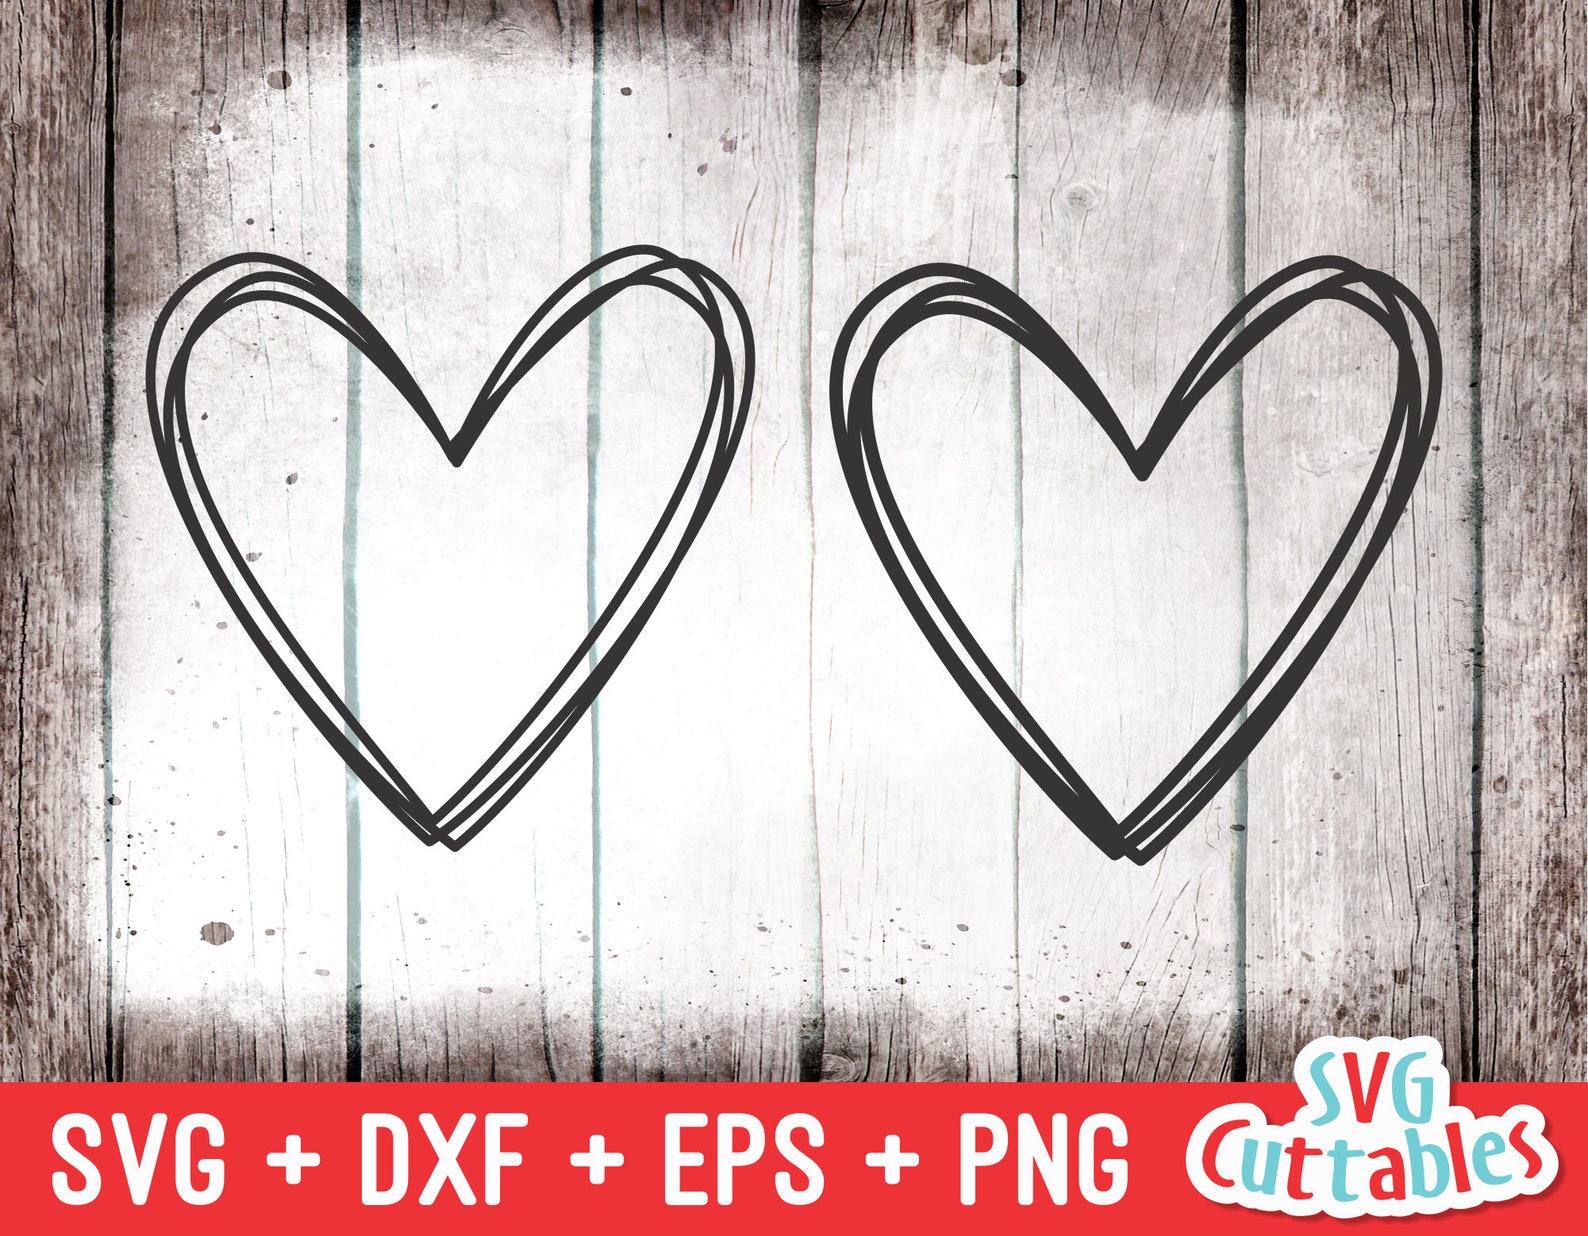 Heart svg - Heart Cut File - Scribble Heart - svg - dxf - eps - png - H...